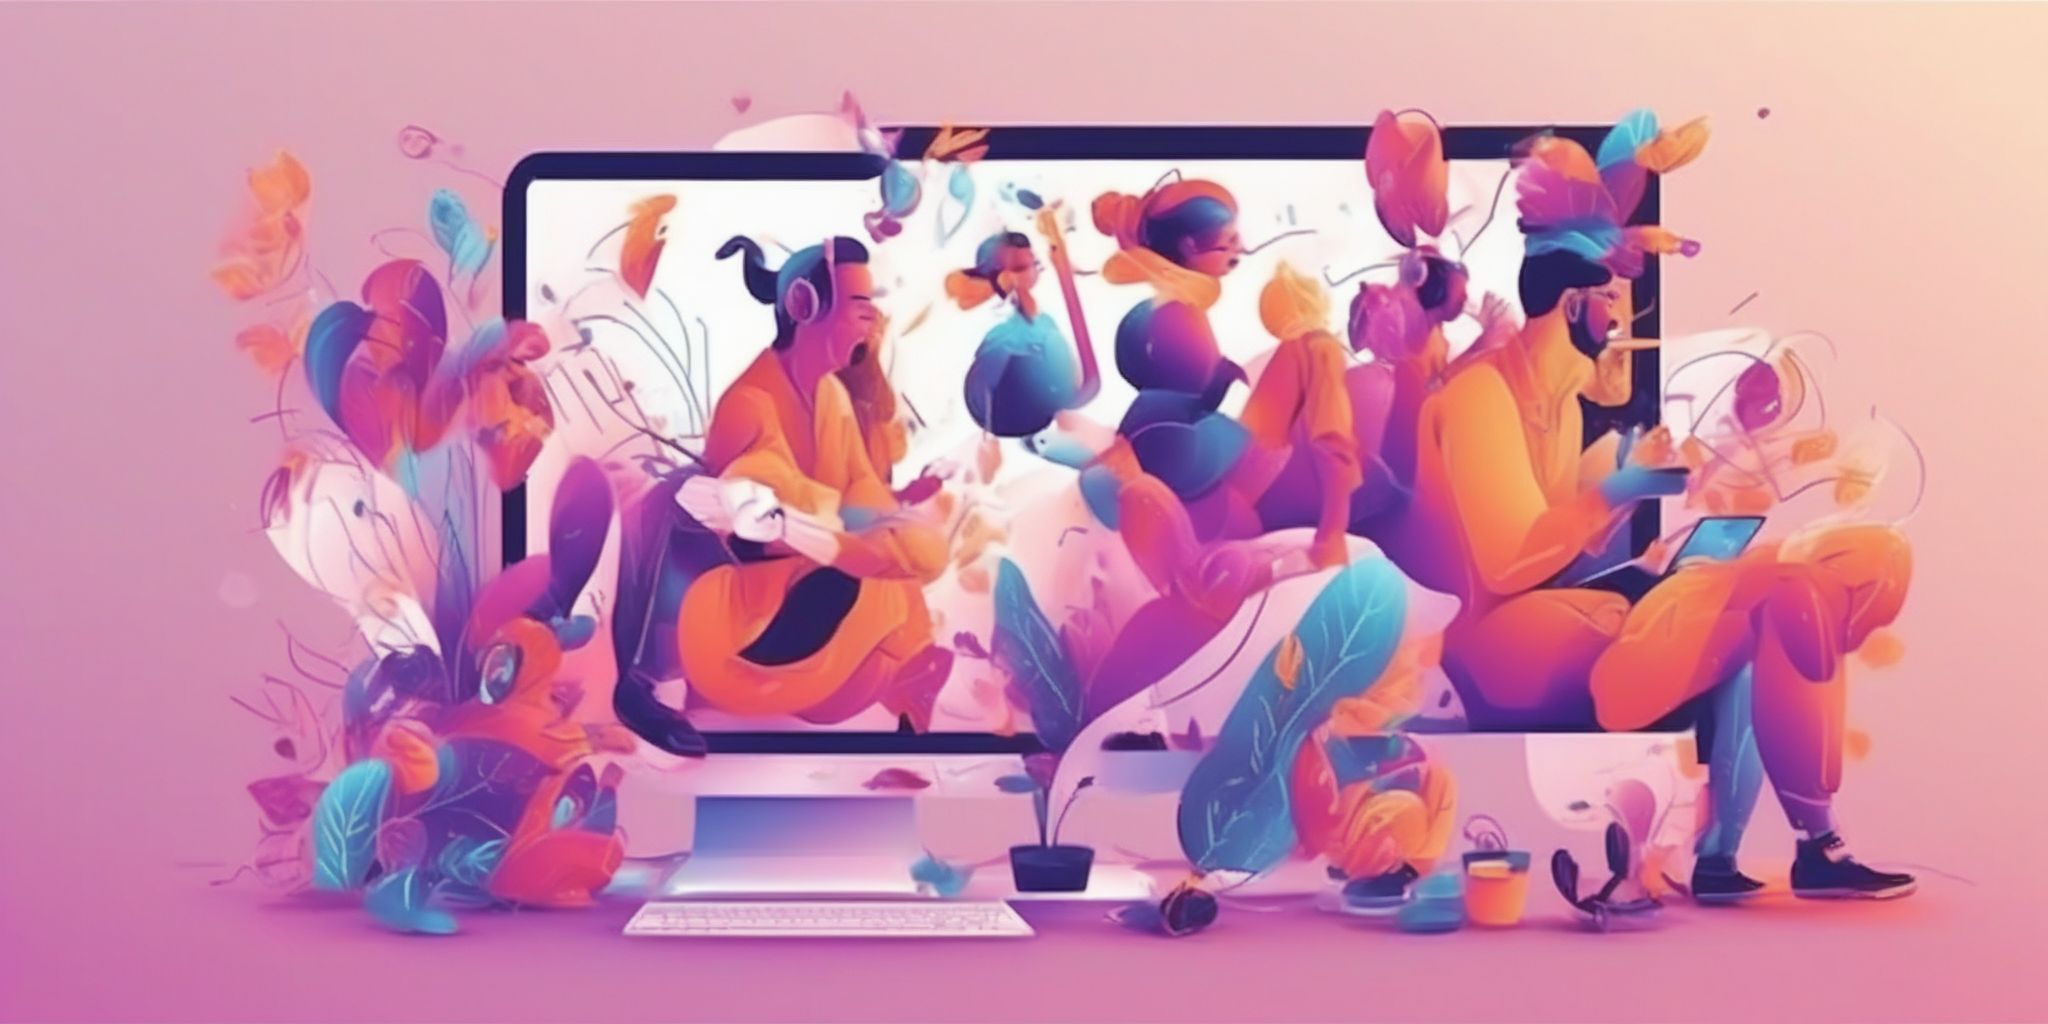 Online entertainment in illustration style with gradients and white background